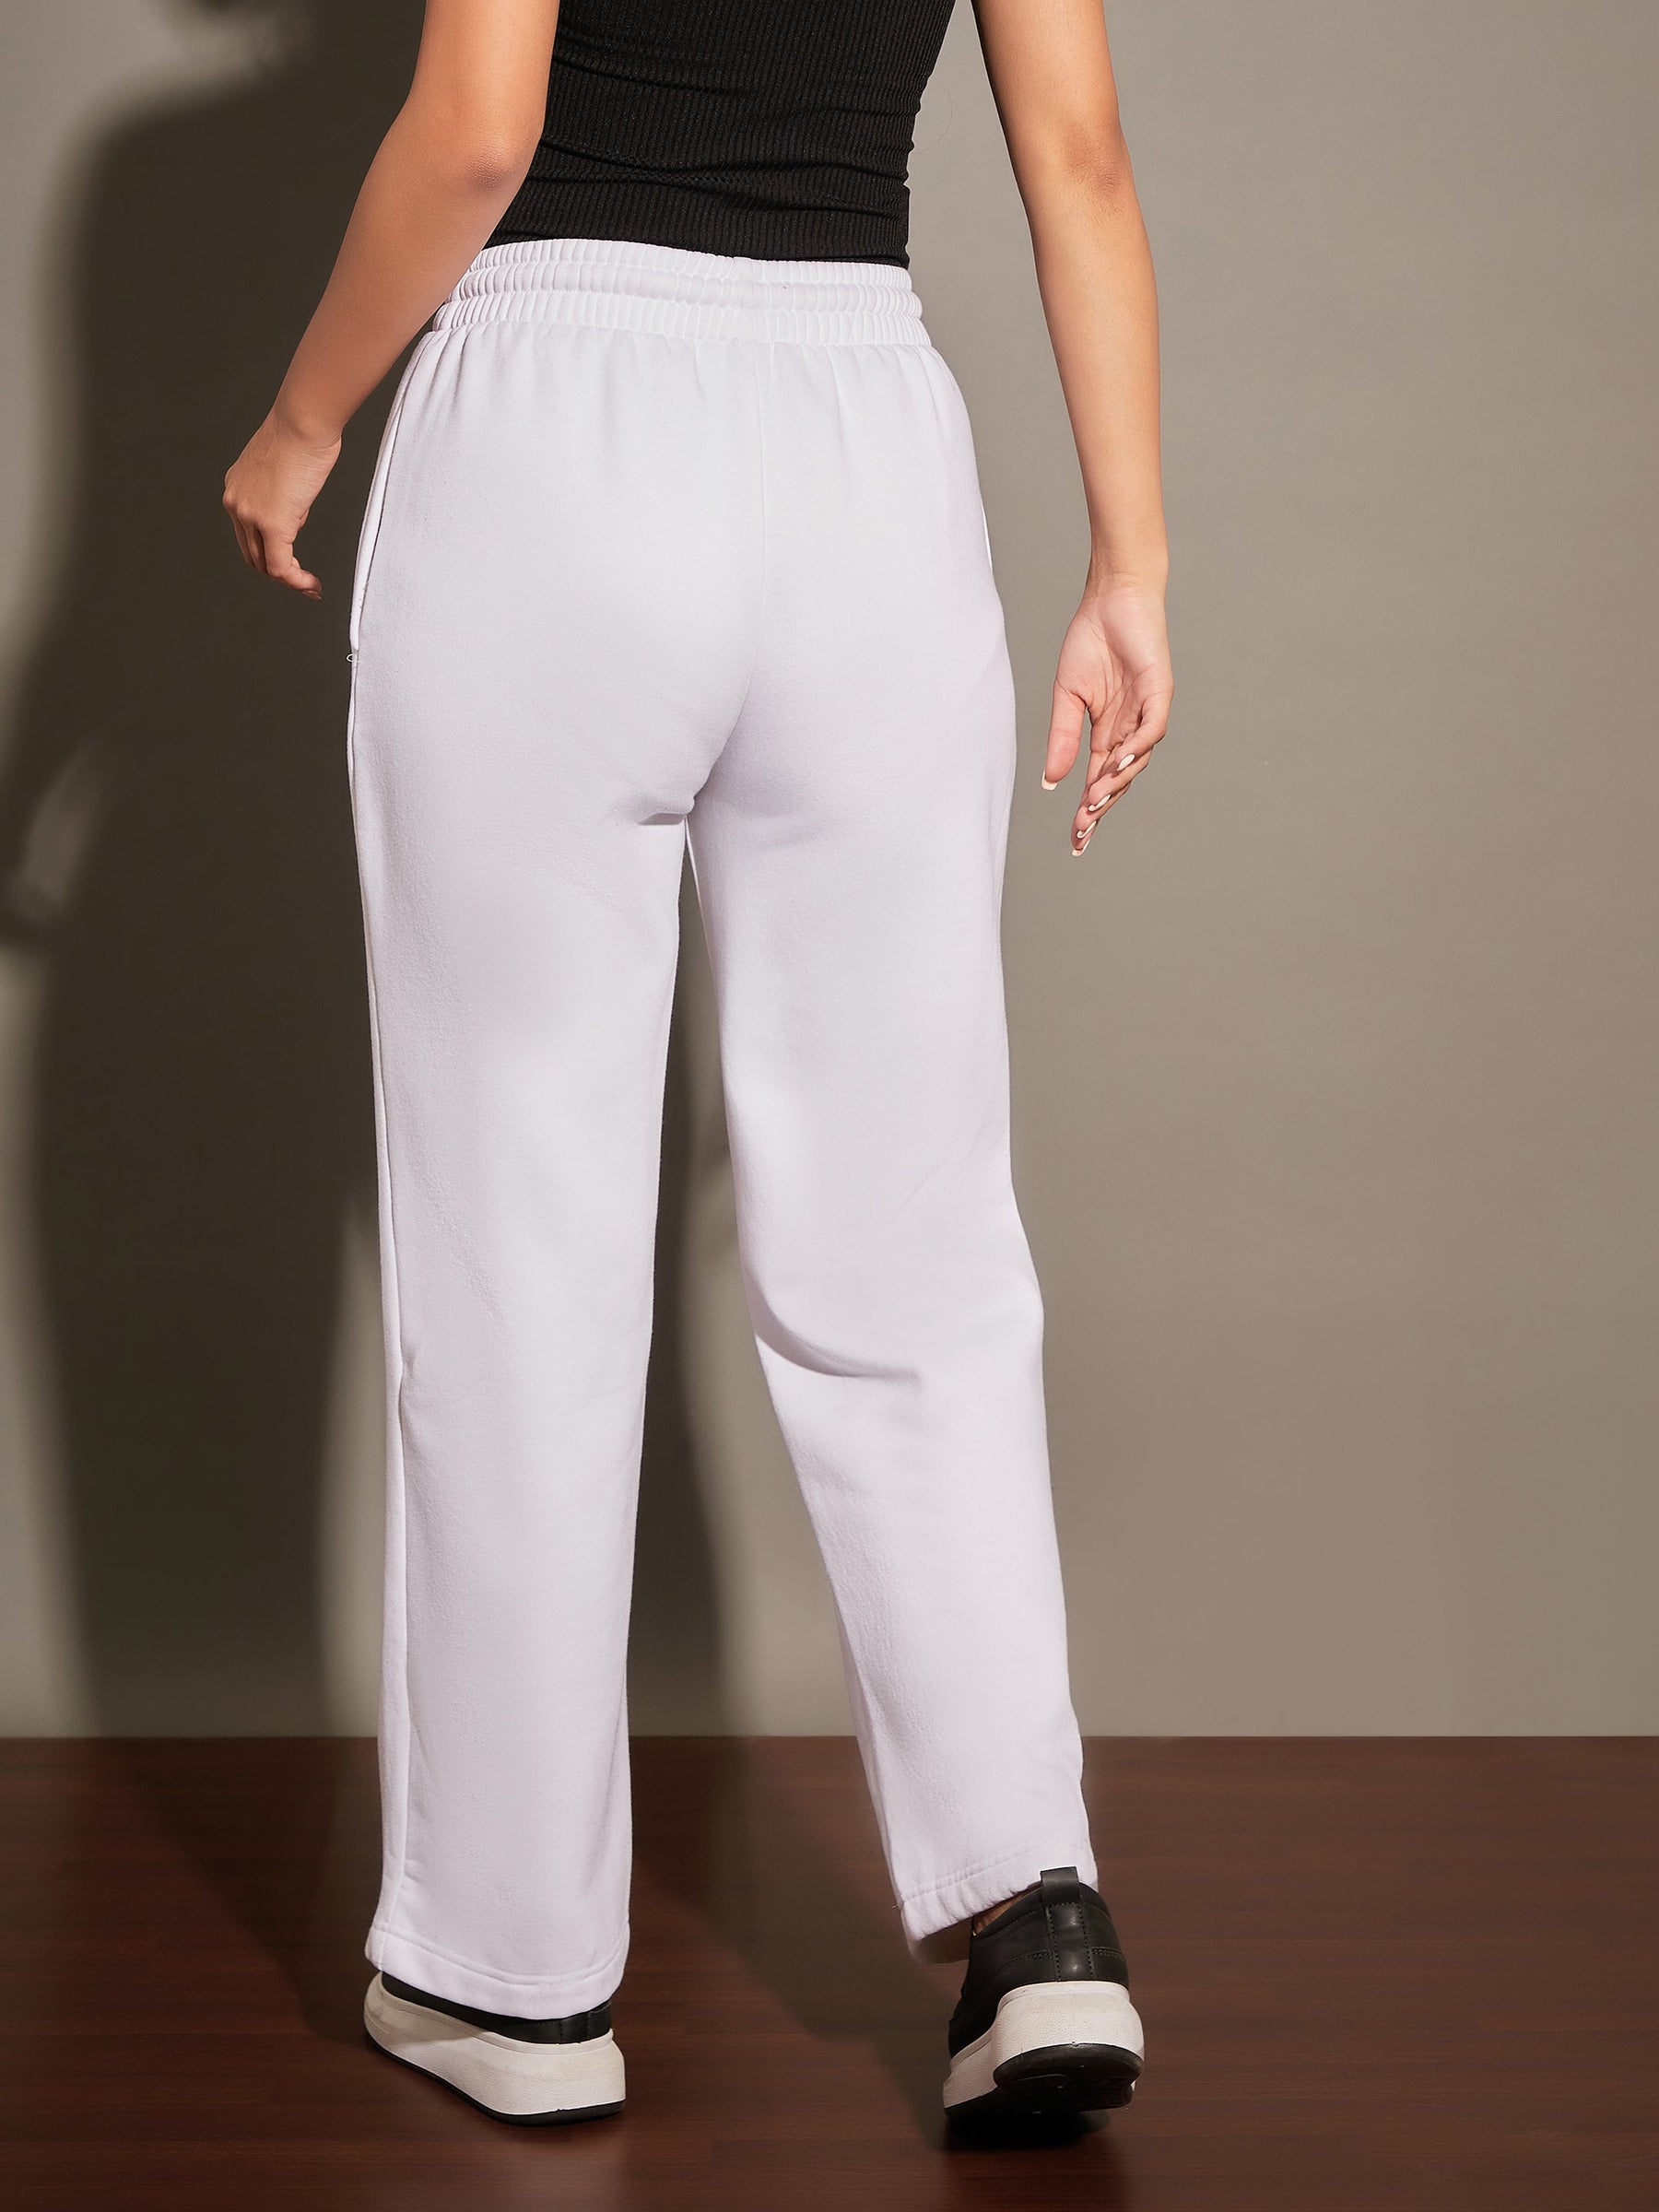 Plus Size Winter Fleece Track Pants For Women at Rs 850.00, Track Pant